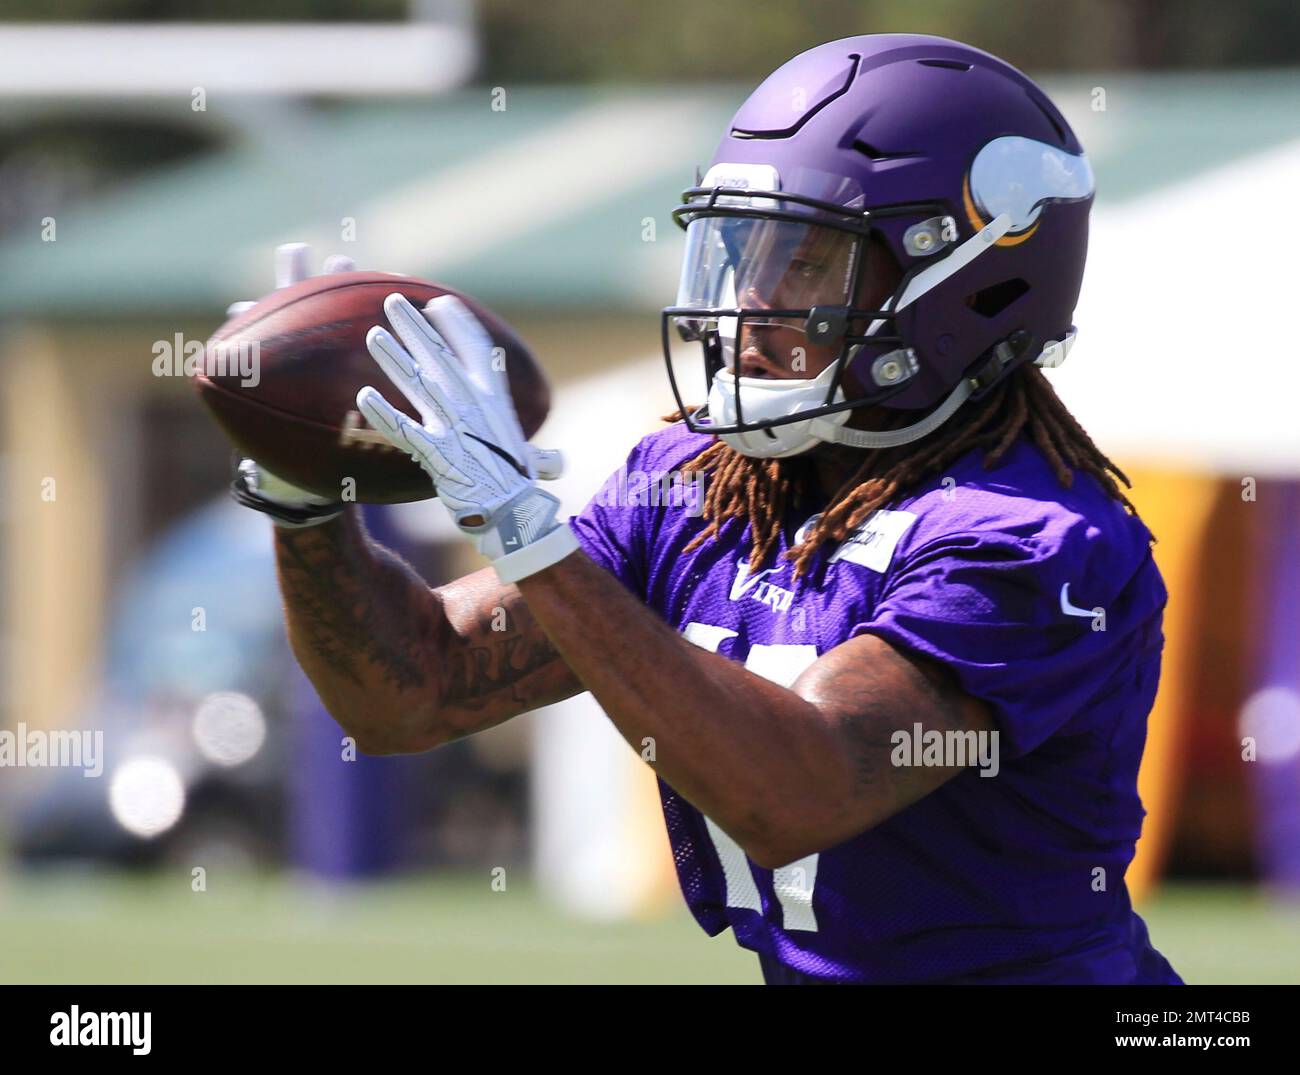 Minnesota Vikings wide receiver Darius Wright (17) makes a catch during NFL  football training camp Thursday, July 27, 2017, in Mankato, Minn. (AP  Photo/Andy Clayton-King Stock Photo - Alamy